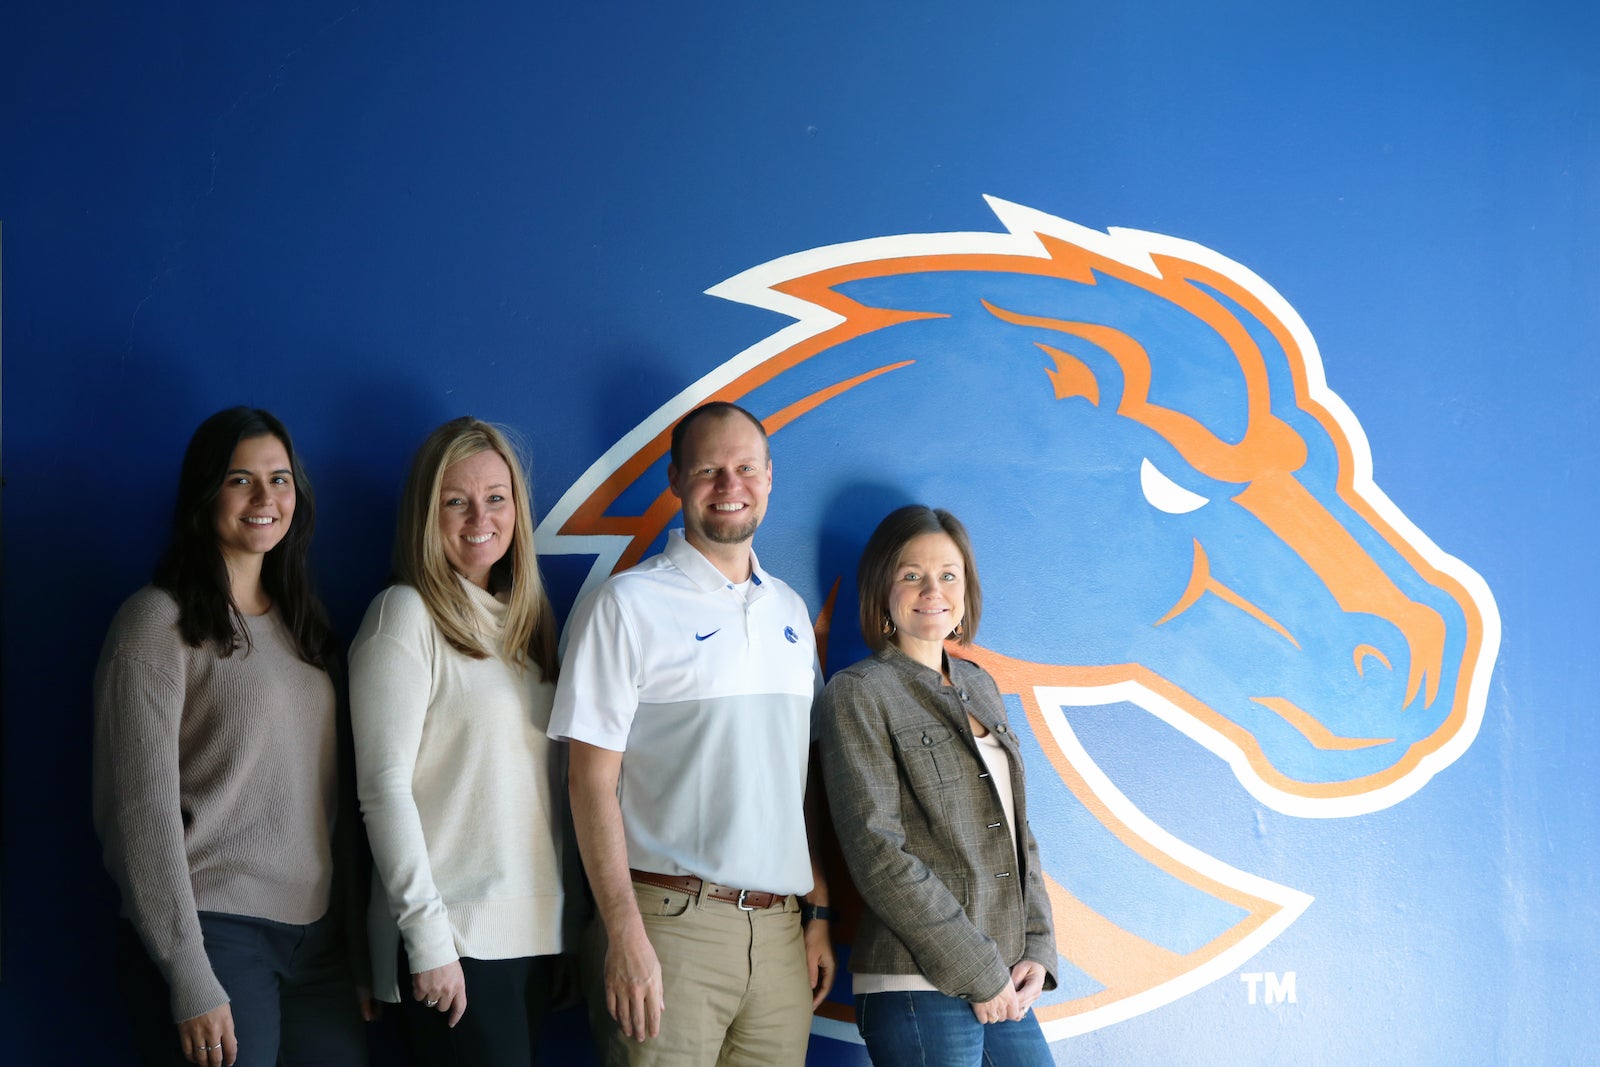 From left: Brooke Pahukoa, student-athlete development coordinator; Sara Swanson, assistant athletic director in student-athlete development; Eric Martin, assistant professor in the kinesiology department; and Kelly Rossetto, associate professor in the communication and media department.